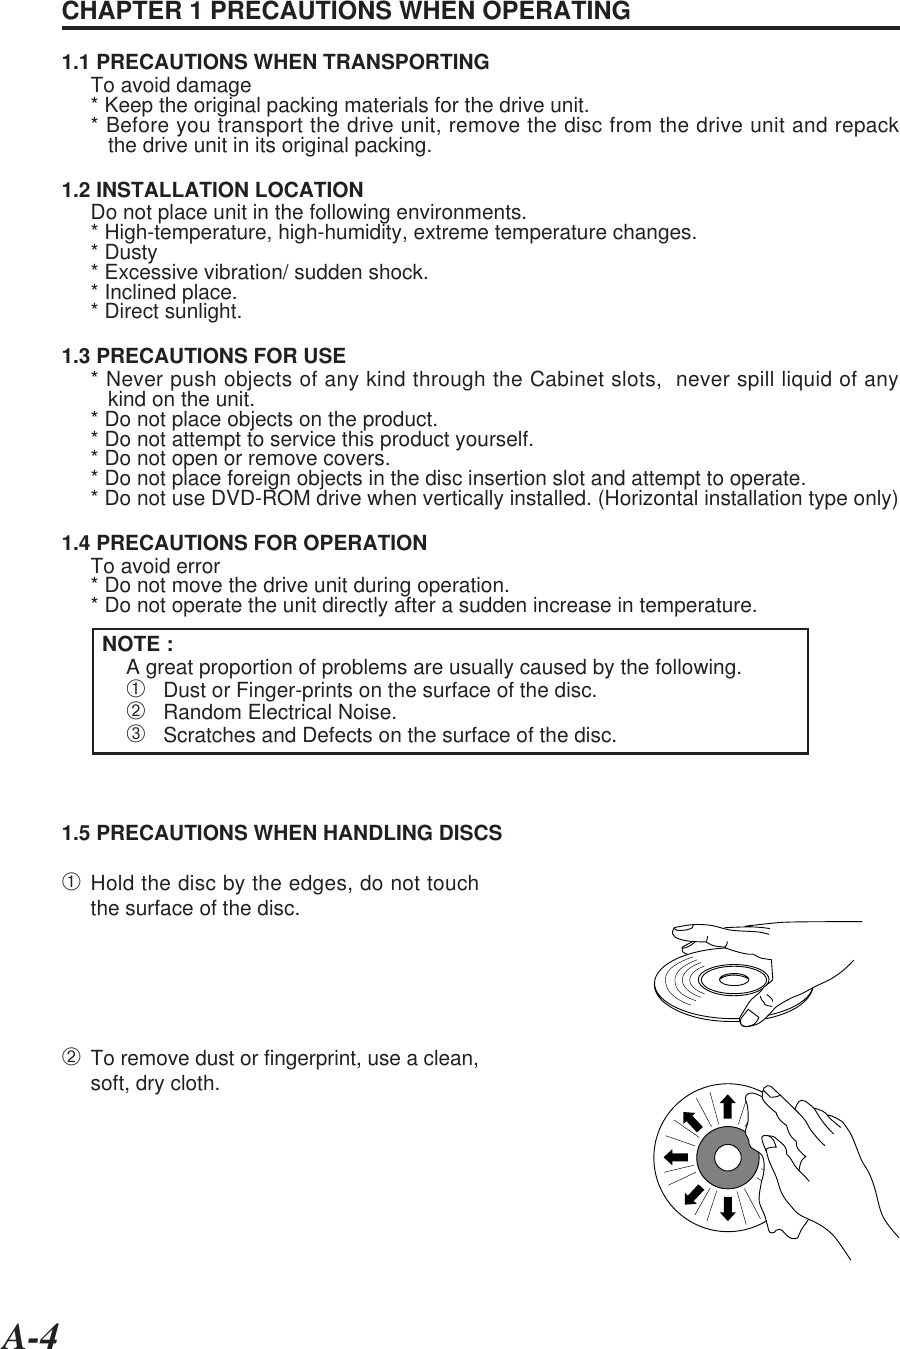 A-4CHAPTER 1 PRECAUTIONS WHEN OPERATING1.1 PRECAUTIONS WHEN TRANSPORTINGTo avoid damage* Keep the original packing materials for the drive unit.* Before you transport the drive unit, remove the disc from the drive unit and repack   the drive unit in its original packing.1.2 INSTALLATION LOCATIONDo not place unit in the following environments.* High-temperature, high-humidity, extreme temperature changes.* Dusty* Excessive vibration/ sudden shock.* Inclined place.* Direct sunlight.1.3 PRECAUTIONS FOR USE* Never push objects of any kind through the Cabinet slots,  never spill liquid of any   kind on the unit.* Do not place objects on the product.* Do not attempt to service this product yourself.* Do not open or remove covers.* Do not place foreign objects in the disc insertion slot and attempt to operate.* Do not use DVD-ROM drive when vertically installed. (Horizontal installation type only)1.4 PRECAUTIONS FOR OPERATIONTo avoid error* Do not move the drive unit during operation.* Do not operate the unit directly after a sudden increase in temperature.NOTE :A great proportion of problems are usually caused by the following.➀   Dust or Finger-prints on the surface of the disc.➁   Random Electrical Noise.➂   Scratches and Defects on the surface of the disc.1.5 PRECAUTIONS WHEN HANDLING DISCS➀Hold the disc by the edges, do not touchthe surface of the disc.➁To remove dust or fingerprint, use a clean,soft, dry cloth.